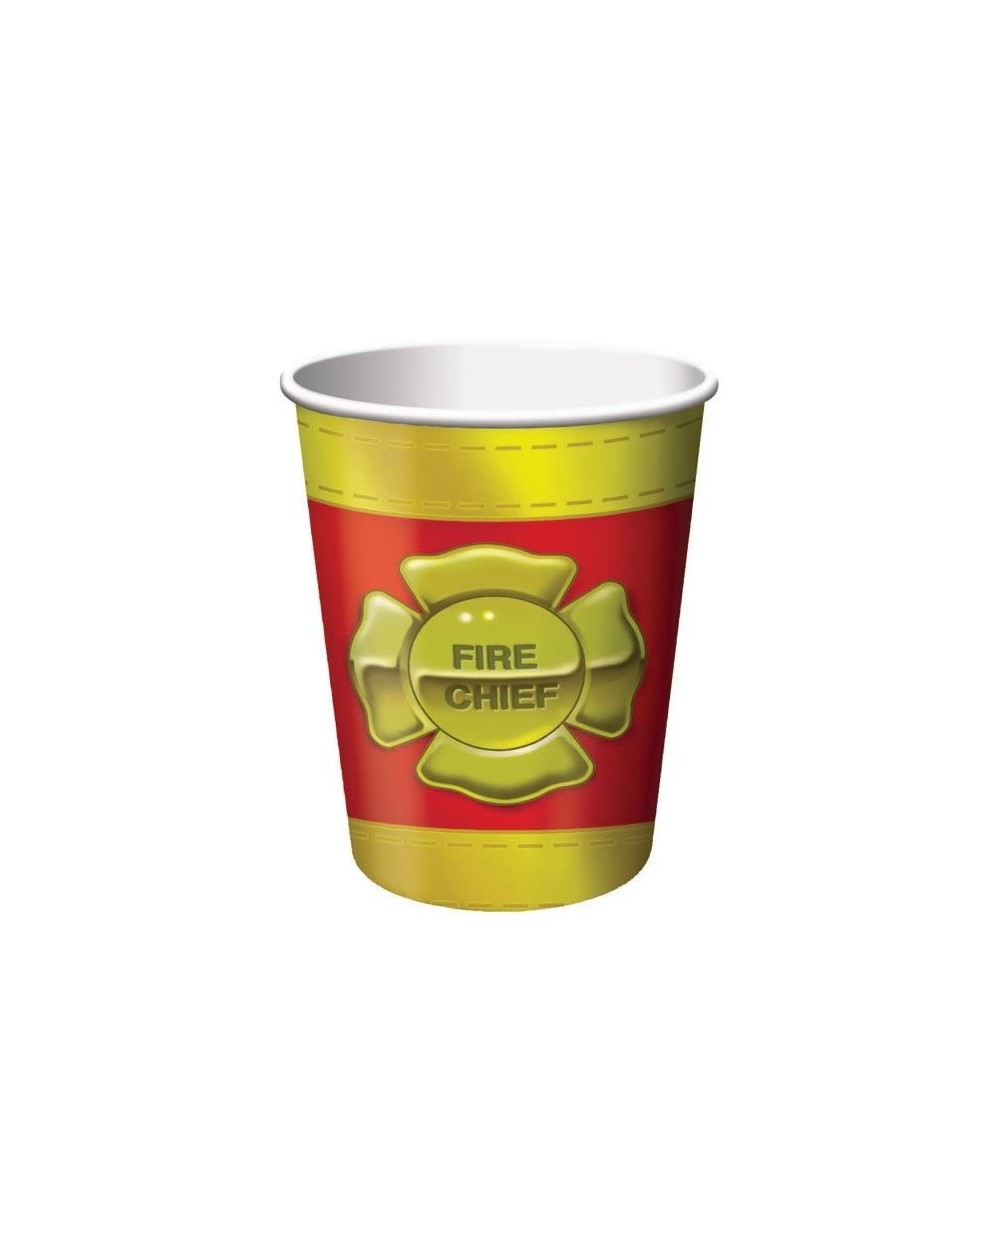 Party Tableware Firefighter 8 Count Paper Cups- 9-Ounce - Firefighter - CC114ERXAX5 $6.54